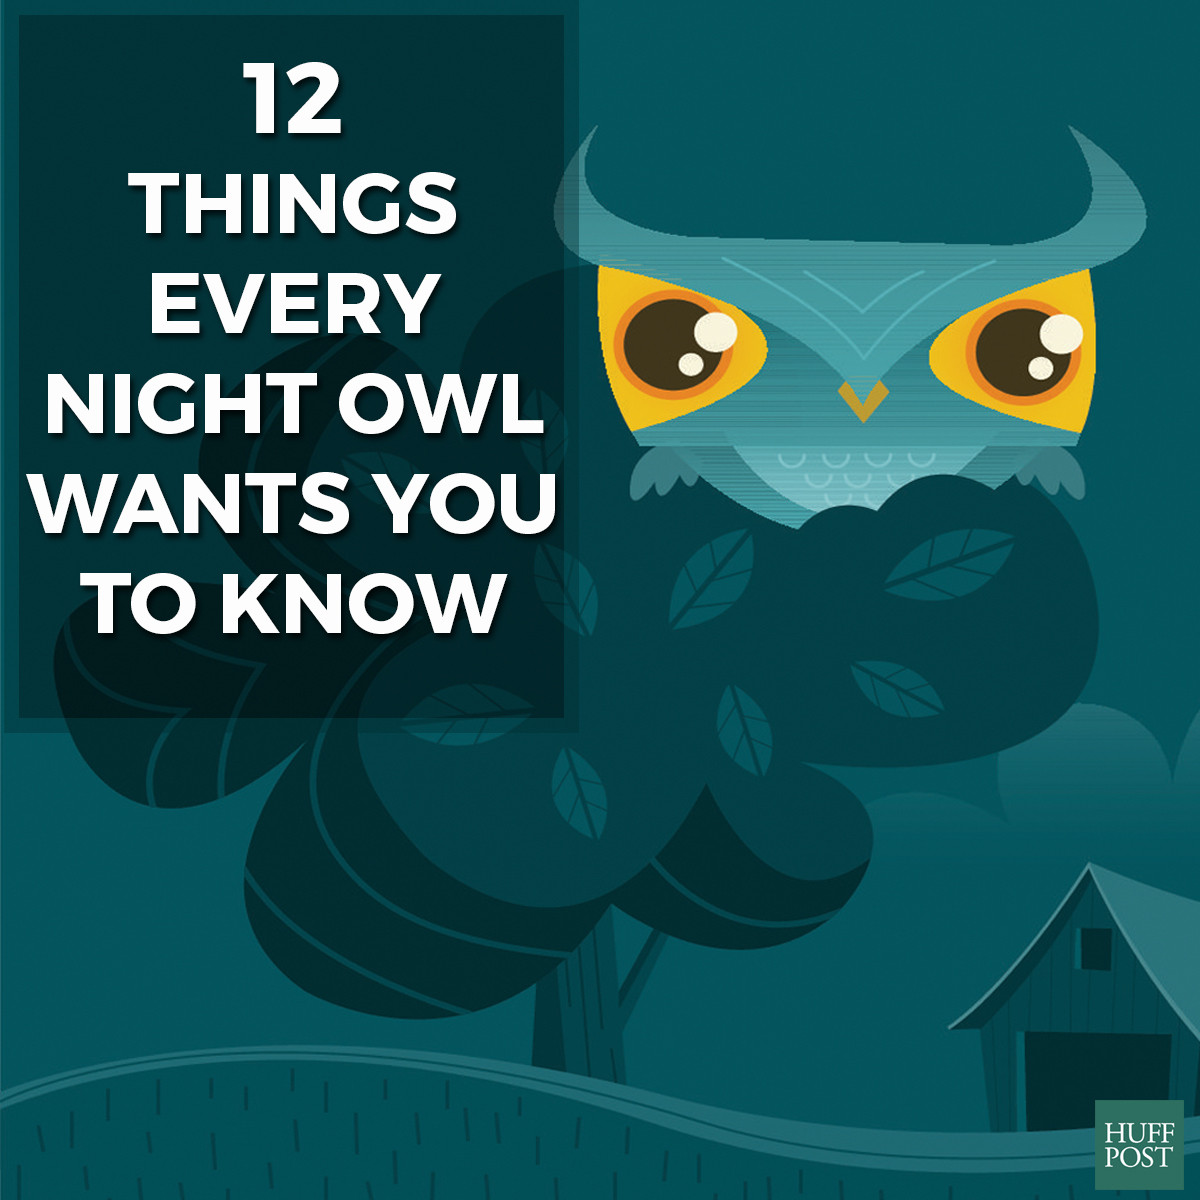 12 Things Every Night Owl Wants You To Know